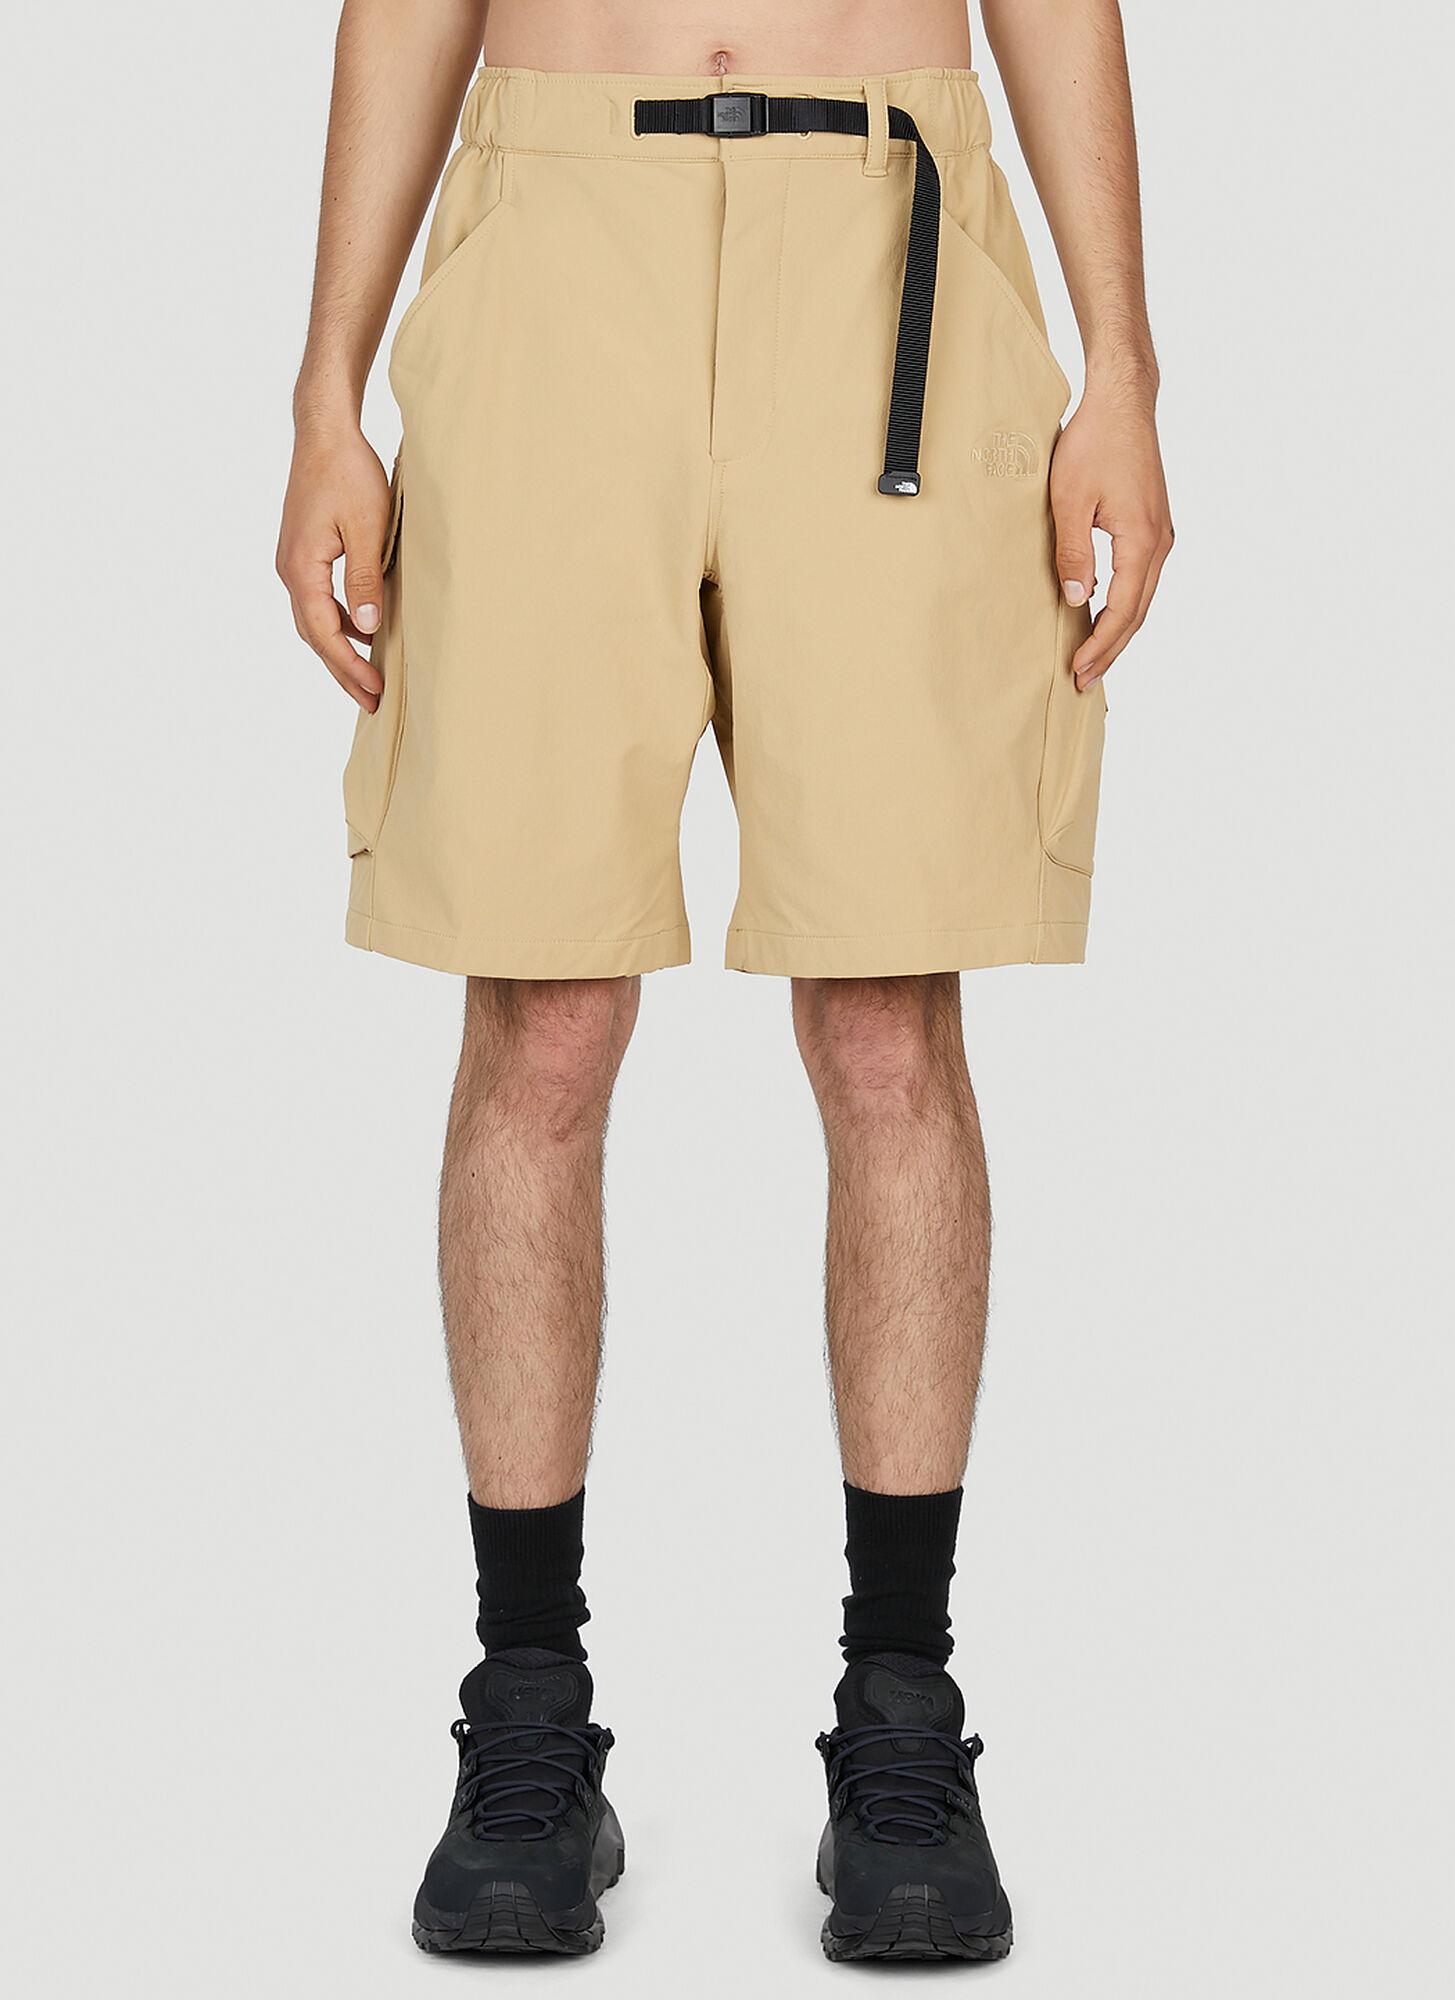 THE NORTH FACE BLACK SERIES Cargo Shorts in Natural for Men | Lyst UK